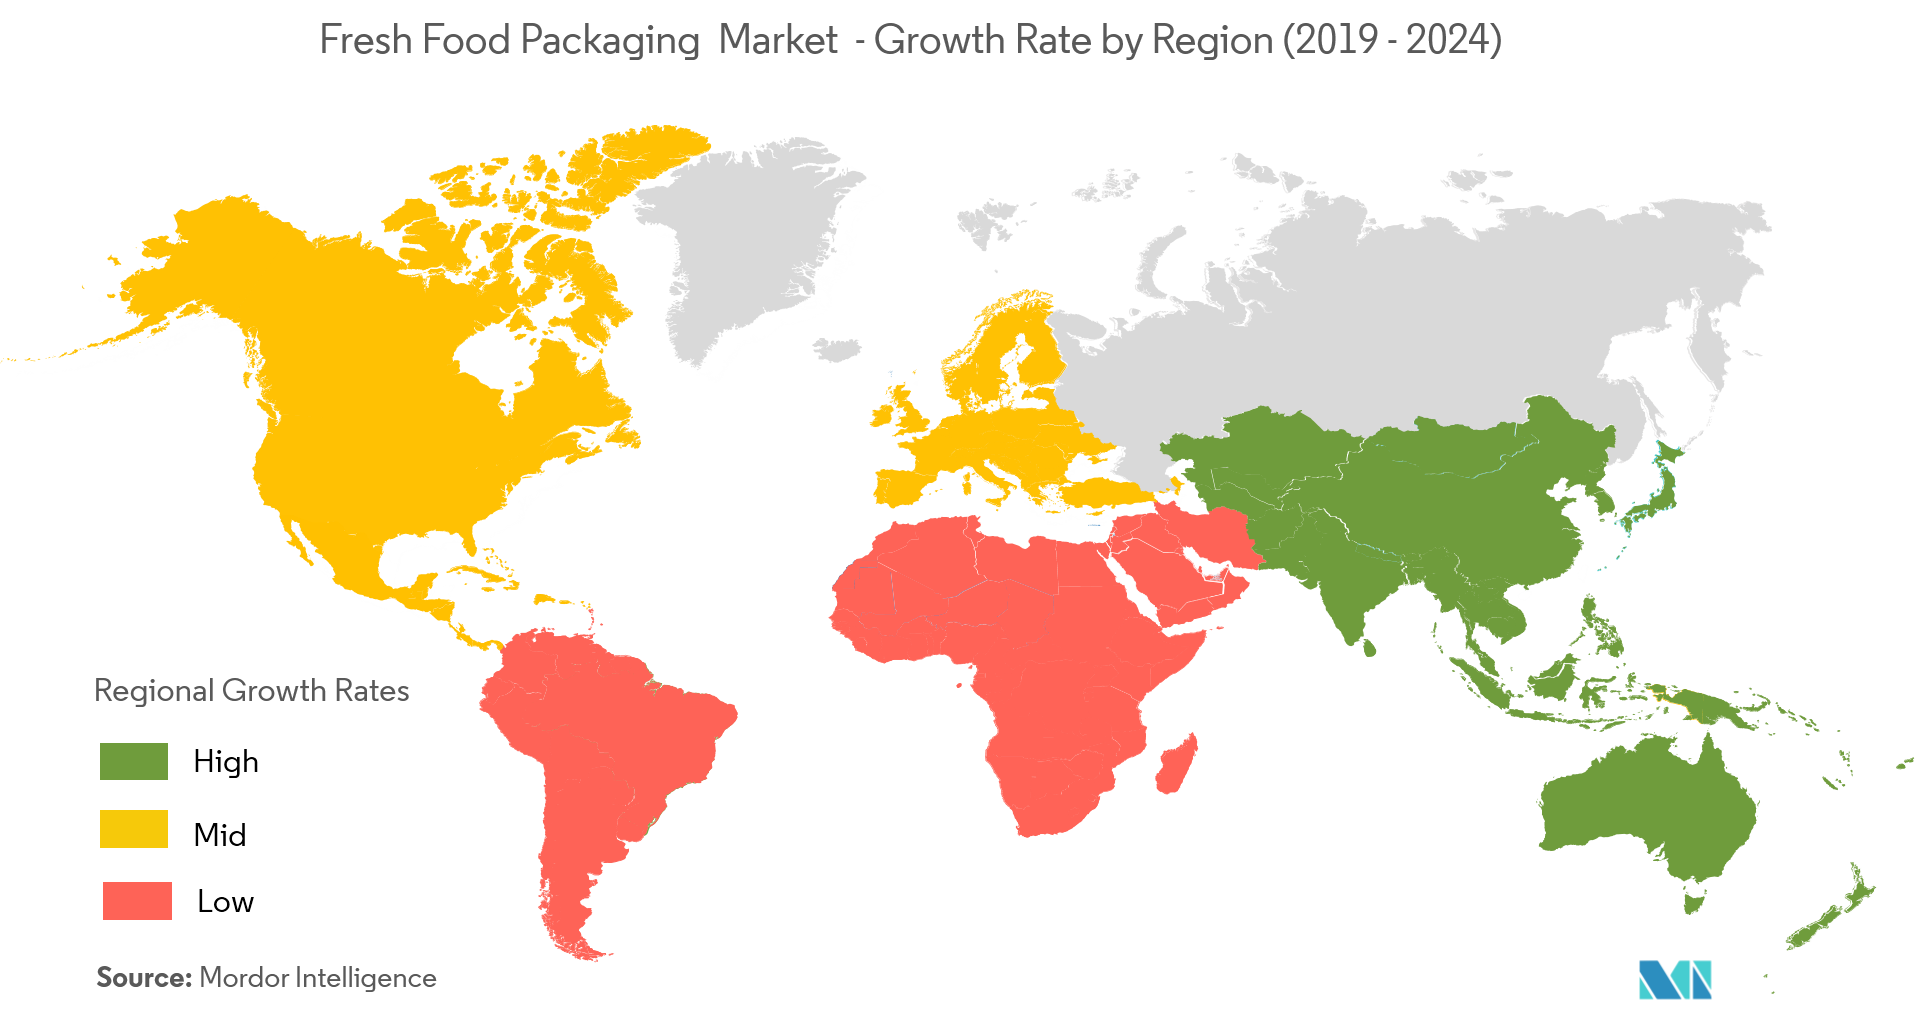 Fresh Food Packaging Market - Growth Rate by Region (2019 - 2024)